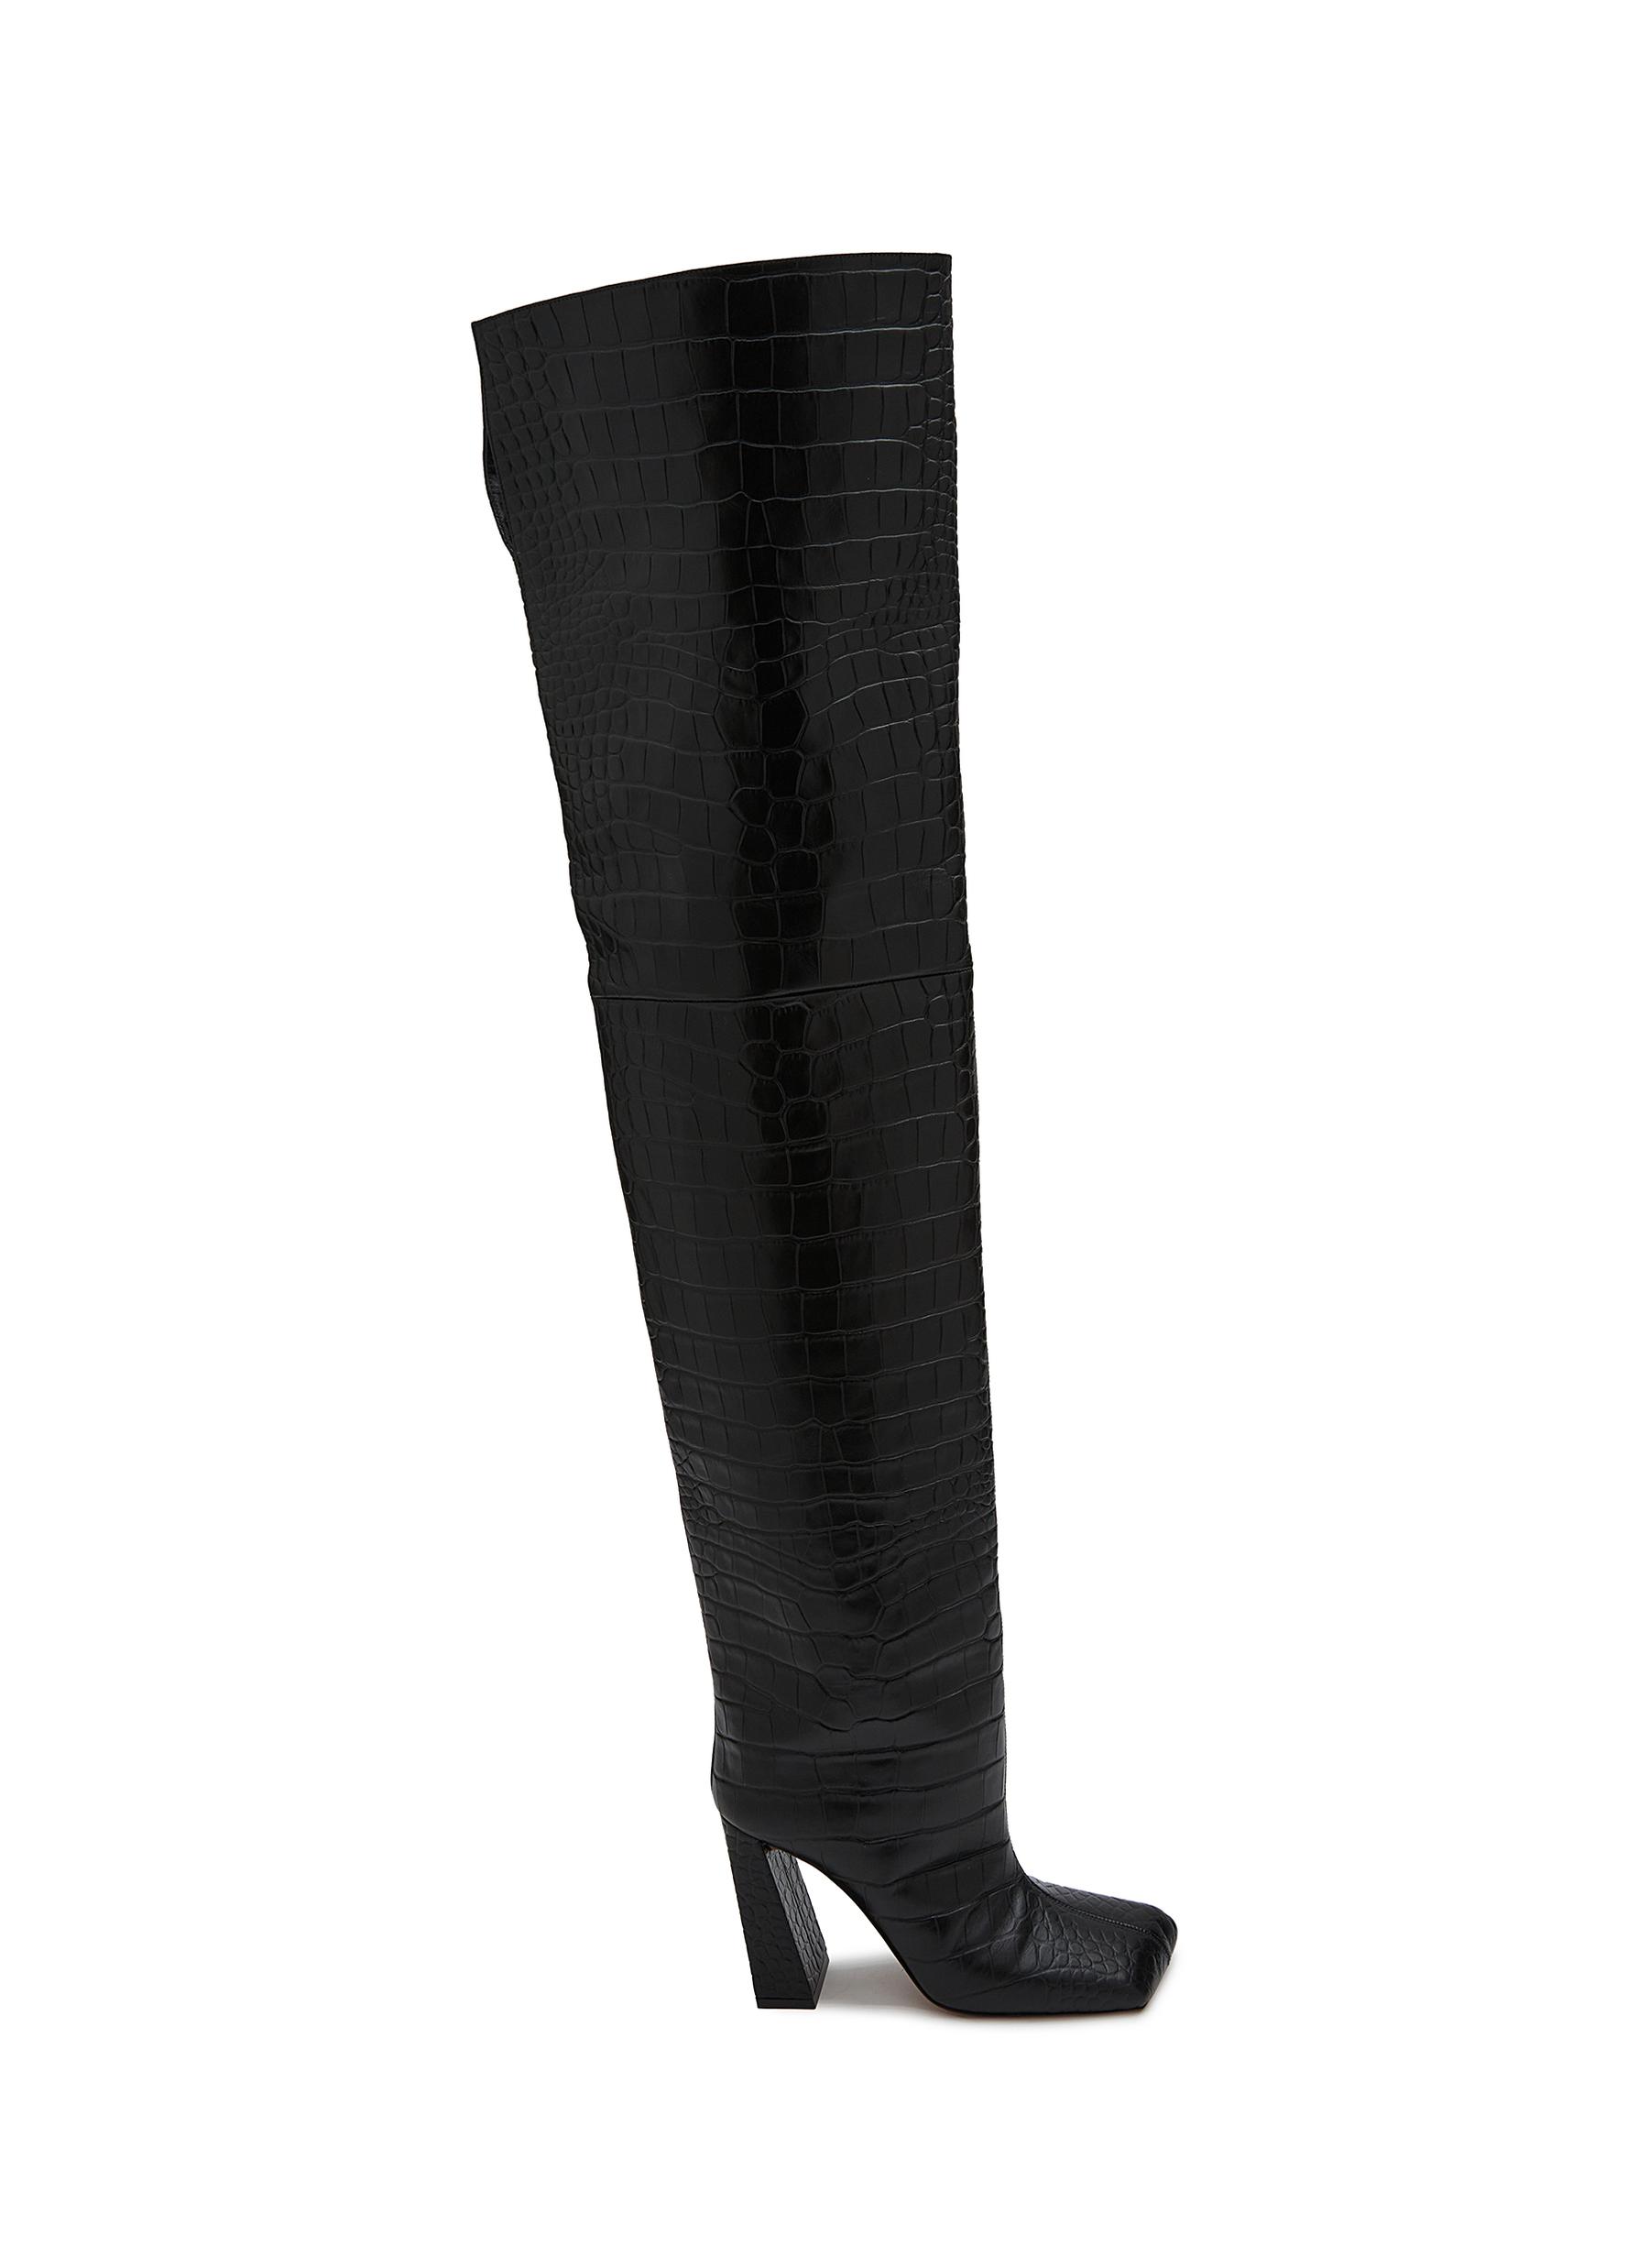 Marine 95 Embossed Croc Leather Thigh High Boots